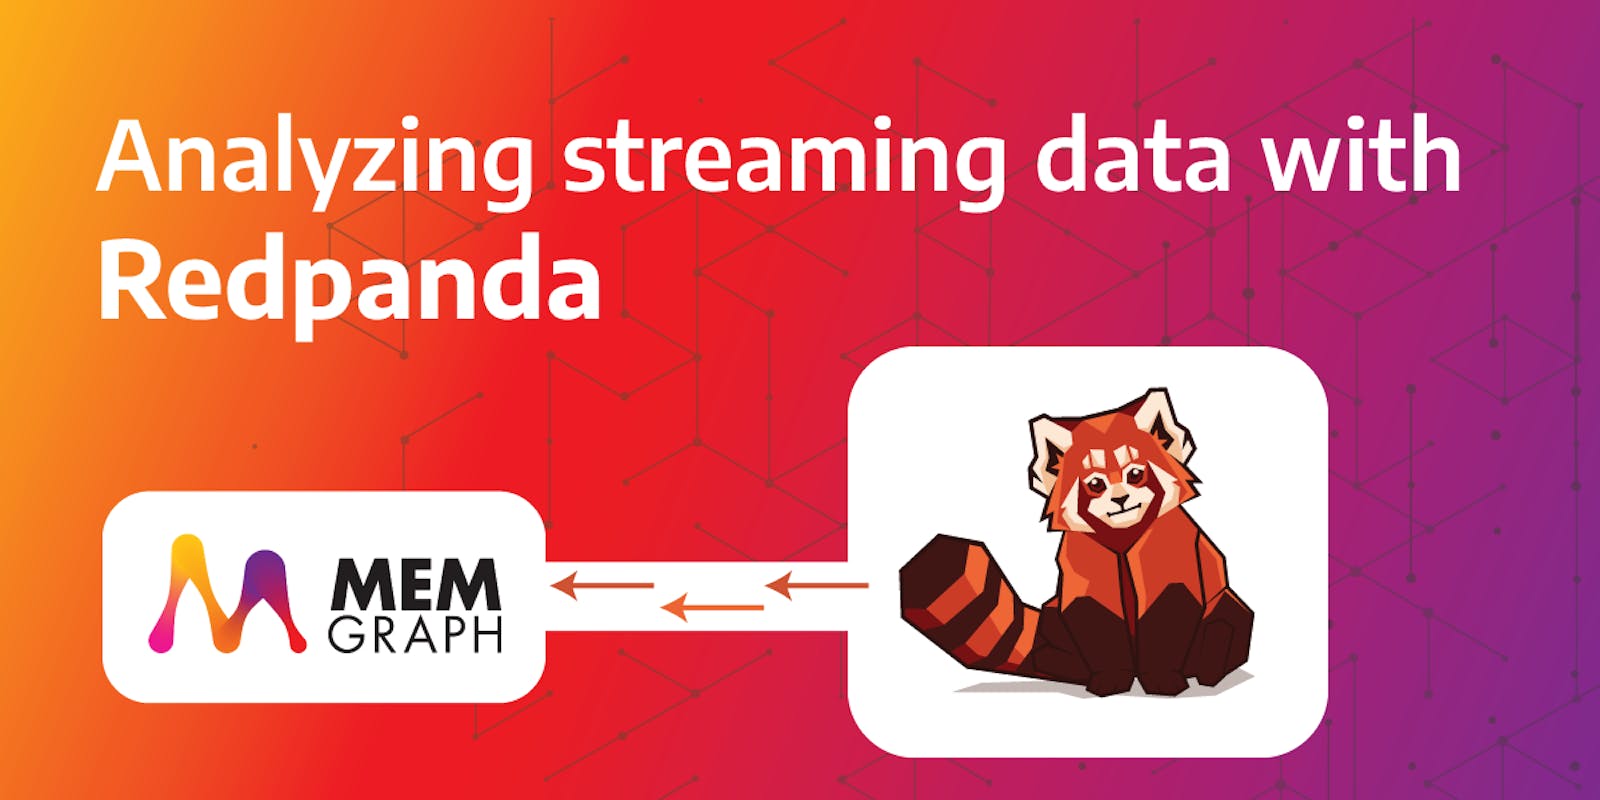 Analyzing Real-Time Movie Reviews With Redpanda and Memgraph